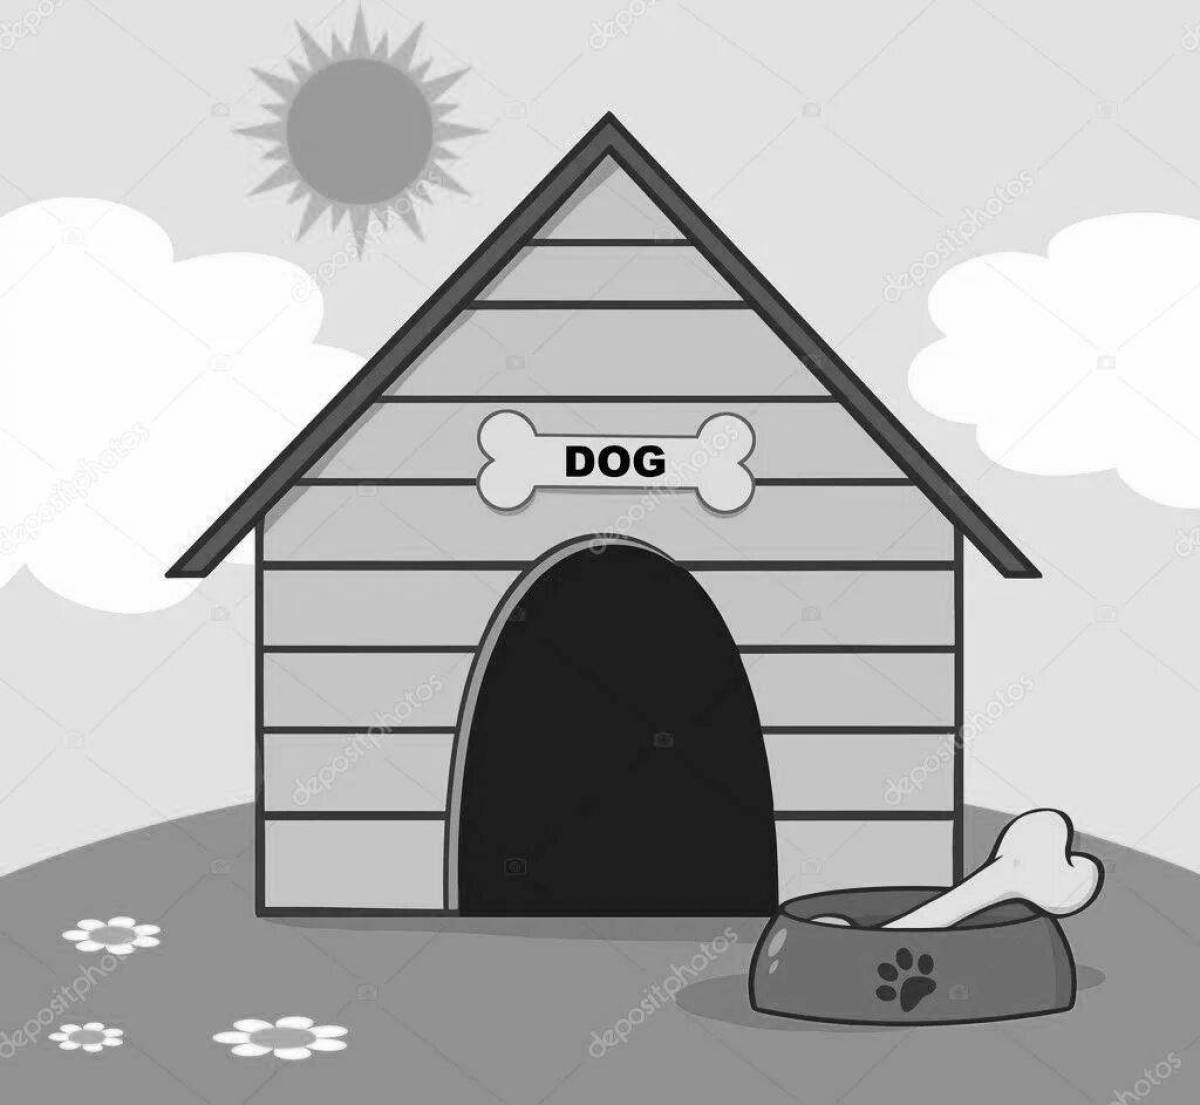 Sweet dog house coloring page